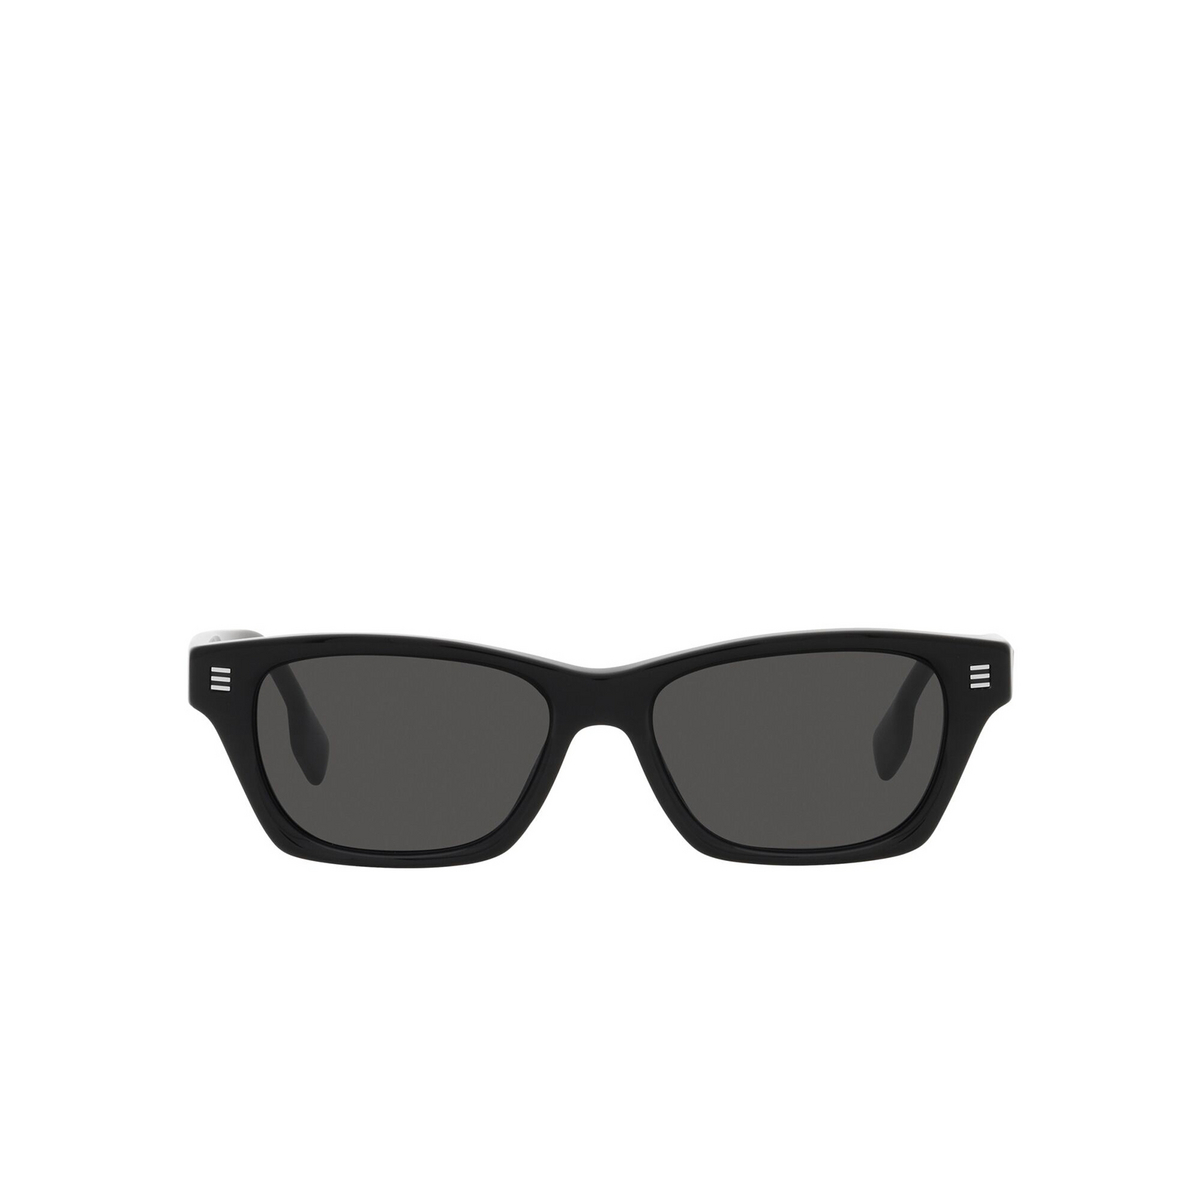 Burberry KENNEDY Sunglasses 300187 Black - front view